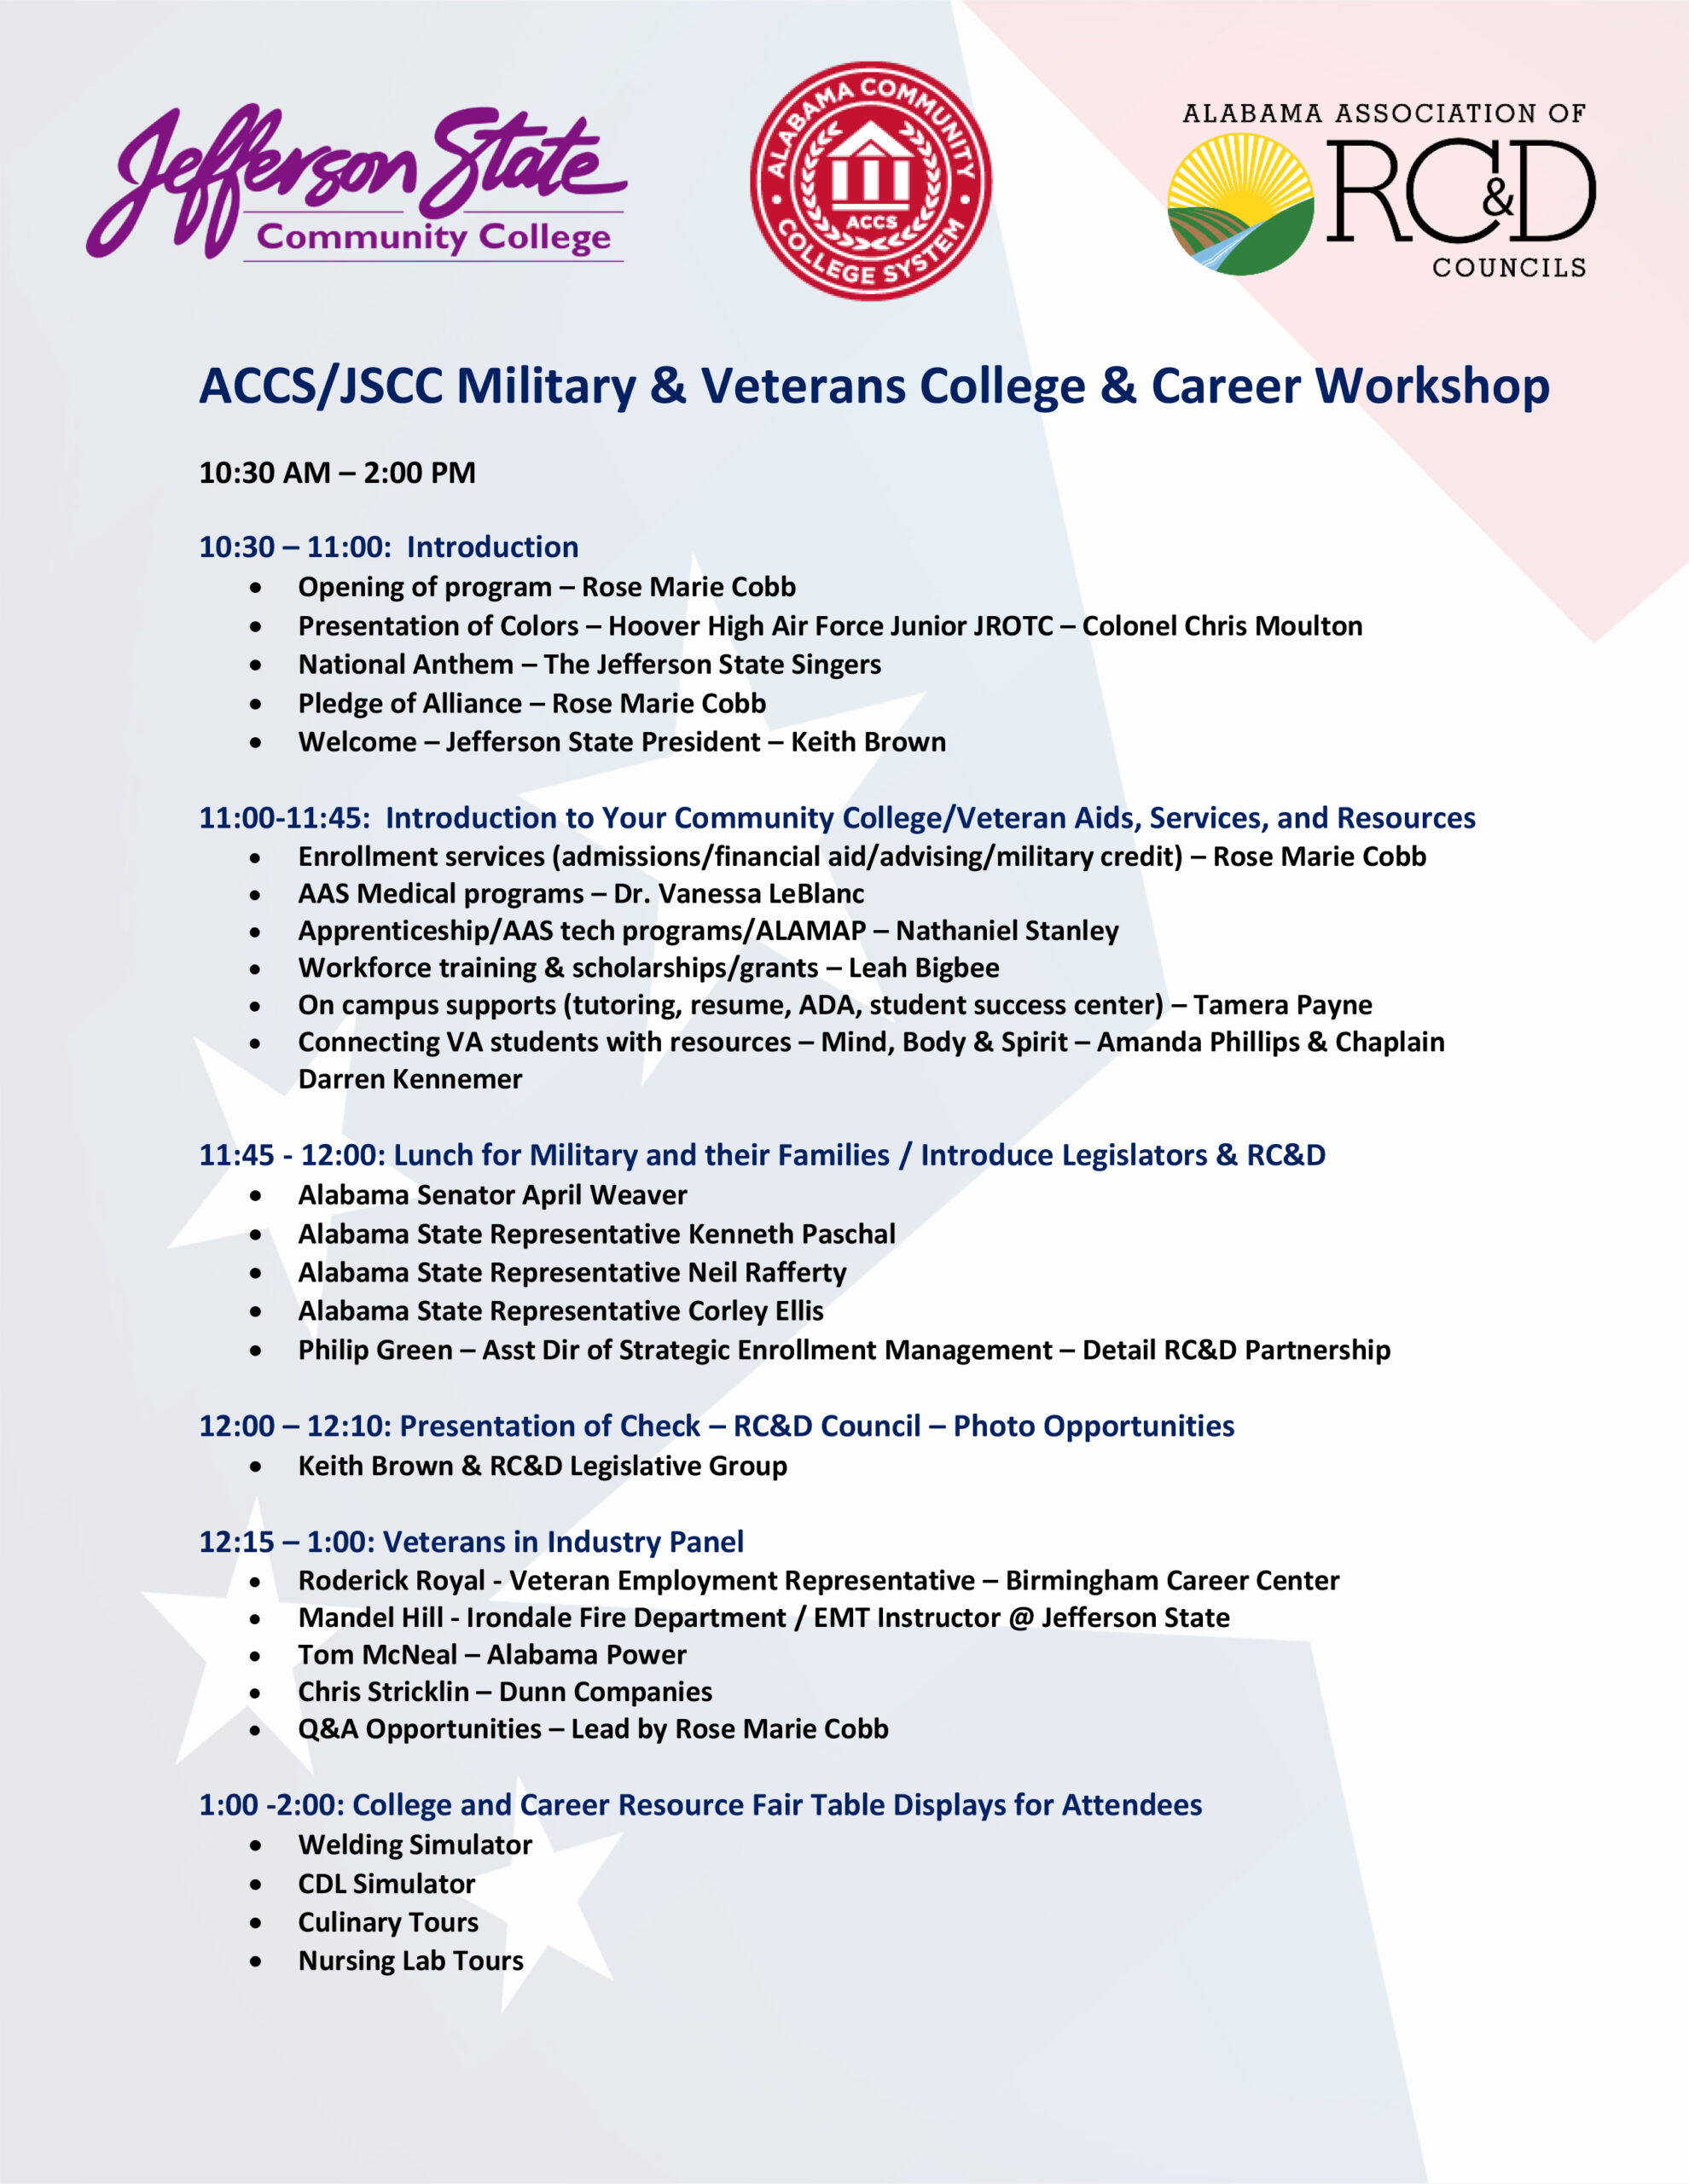 ACCS JSCC Military Career Luncheon Workshop